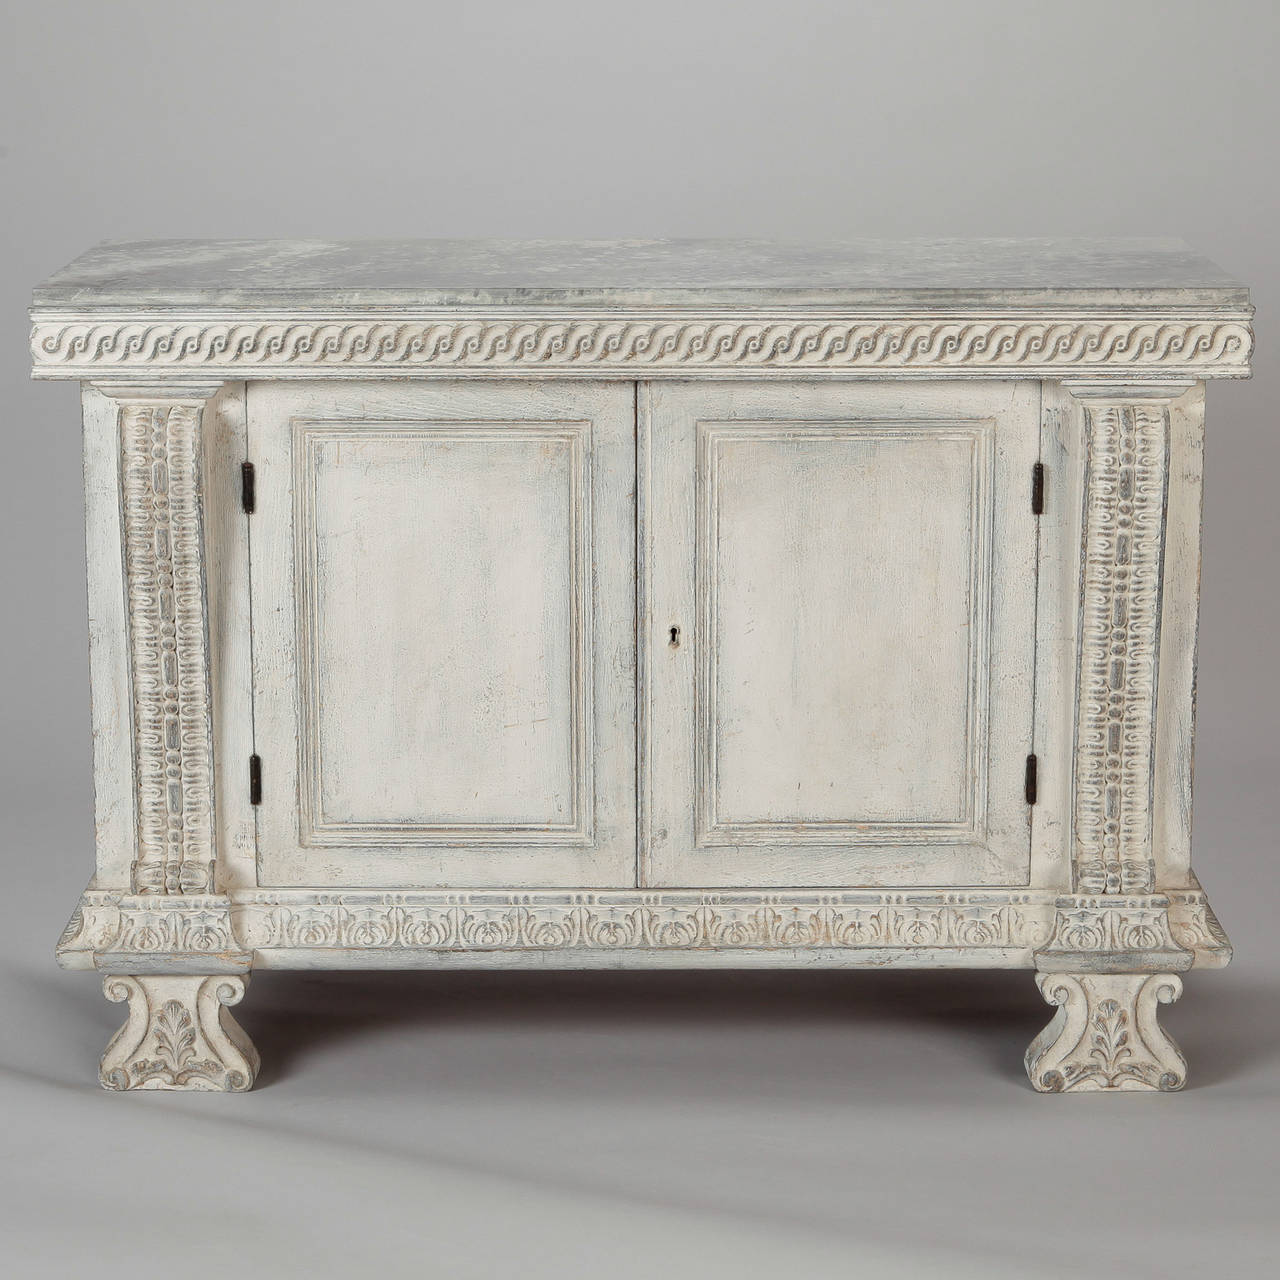 Circa 1920s Italian two door wood chest with white painted finish, faux painted top and carved details around the aprons, front supports and feet.